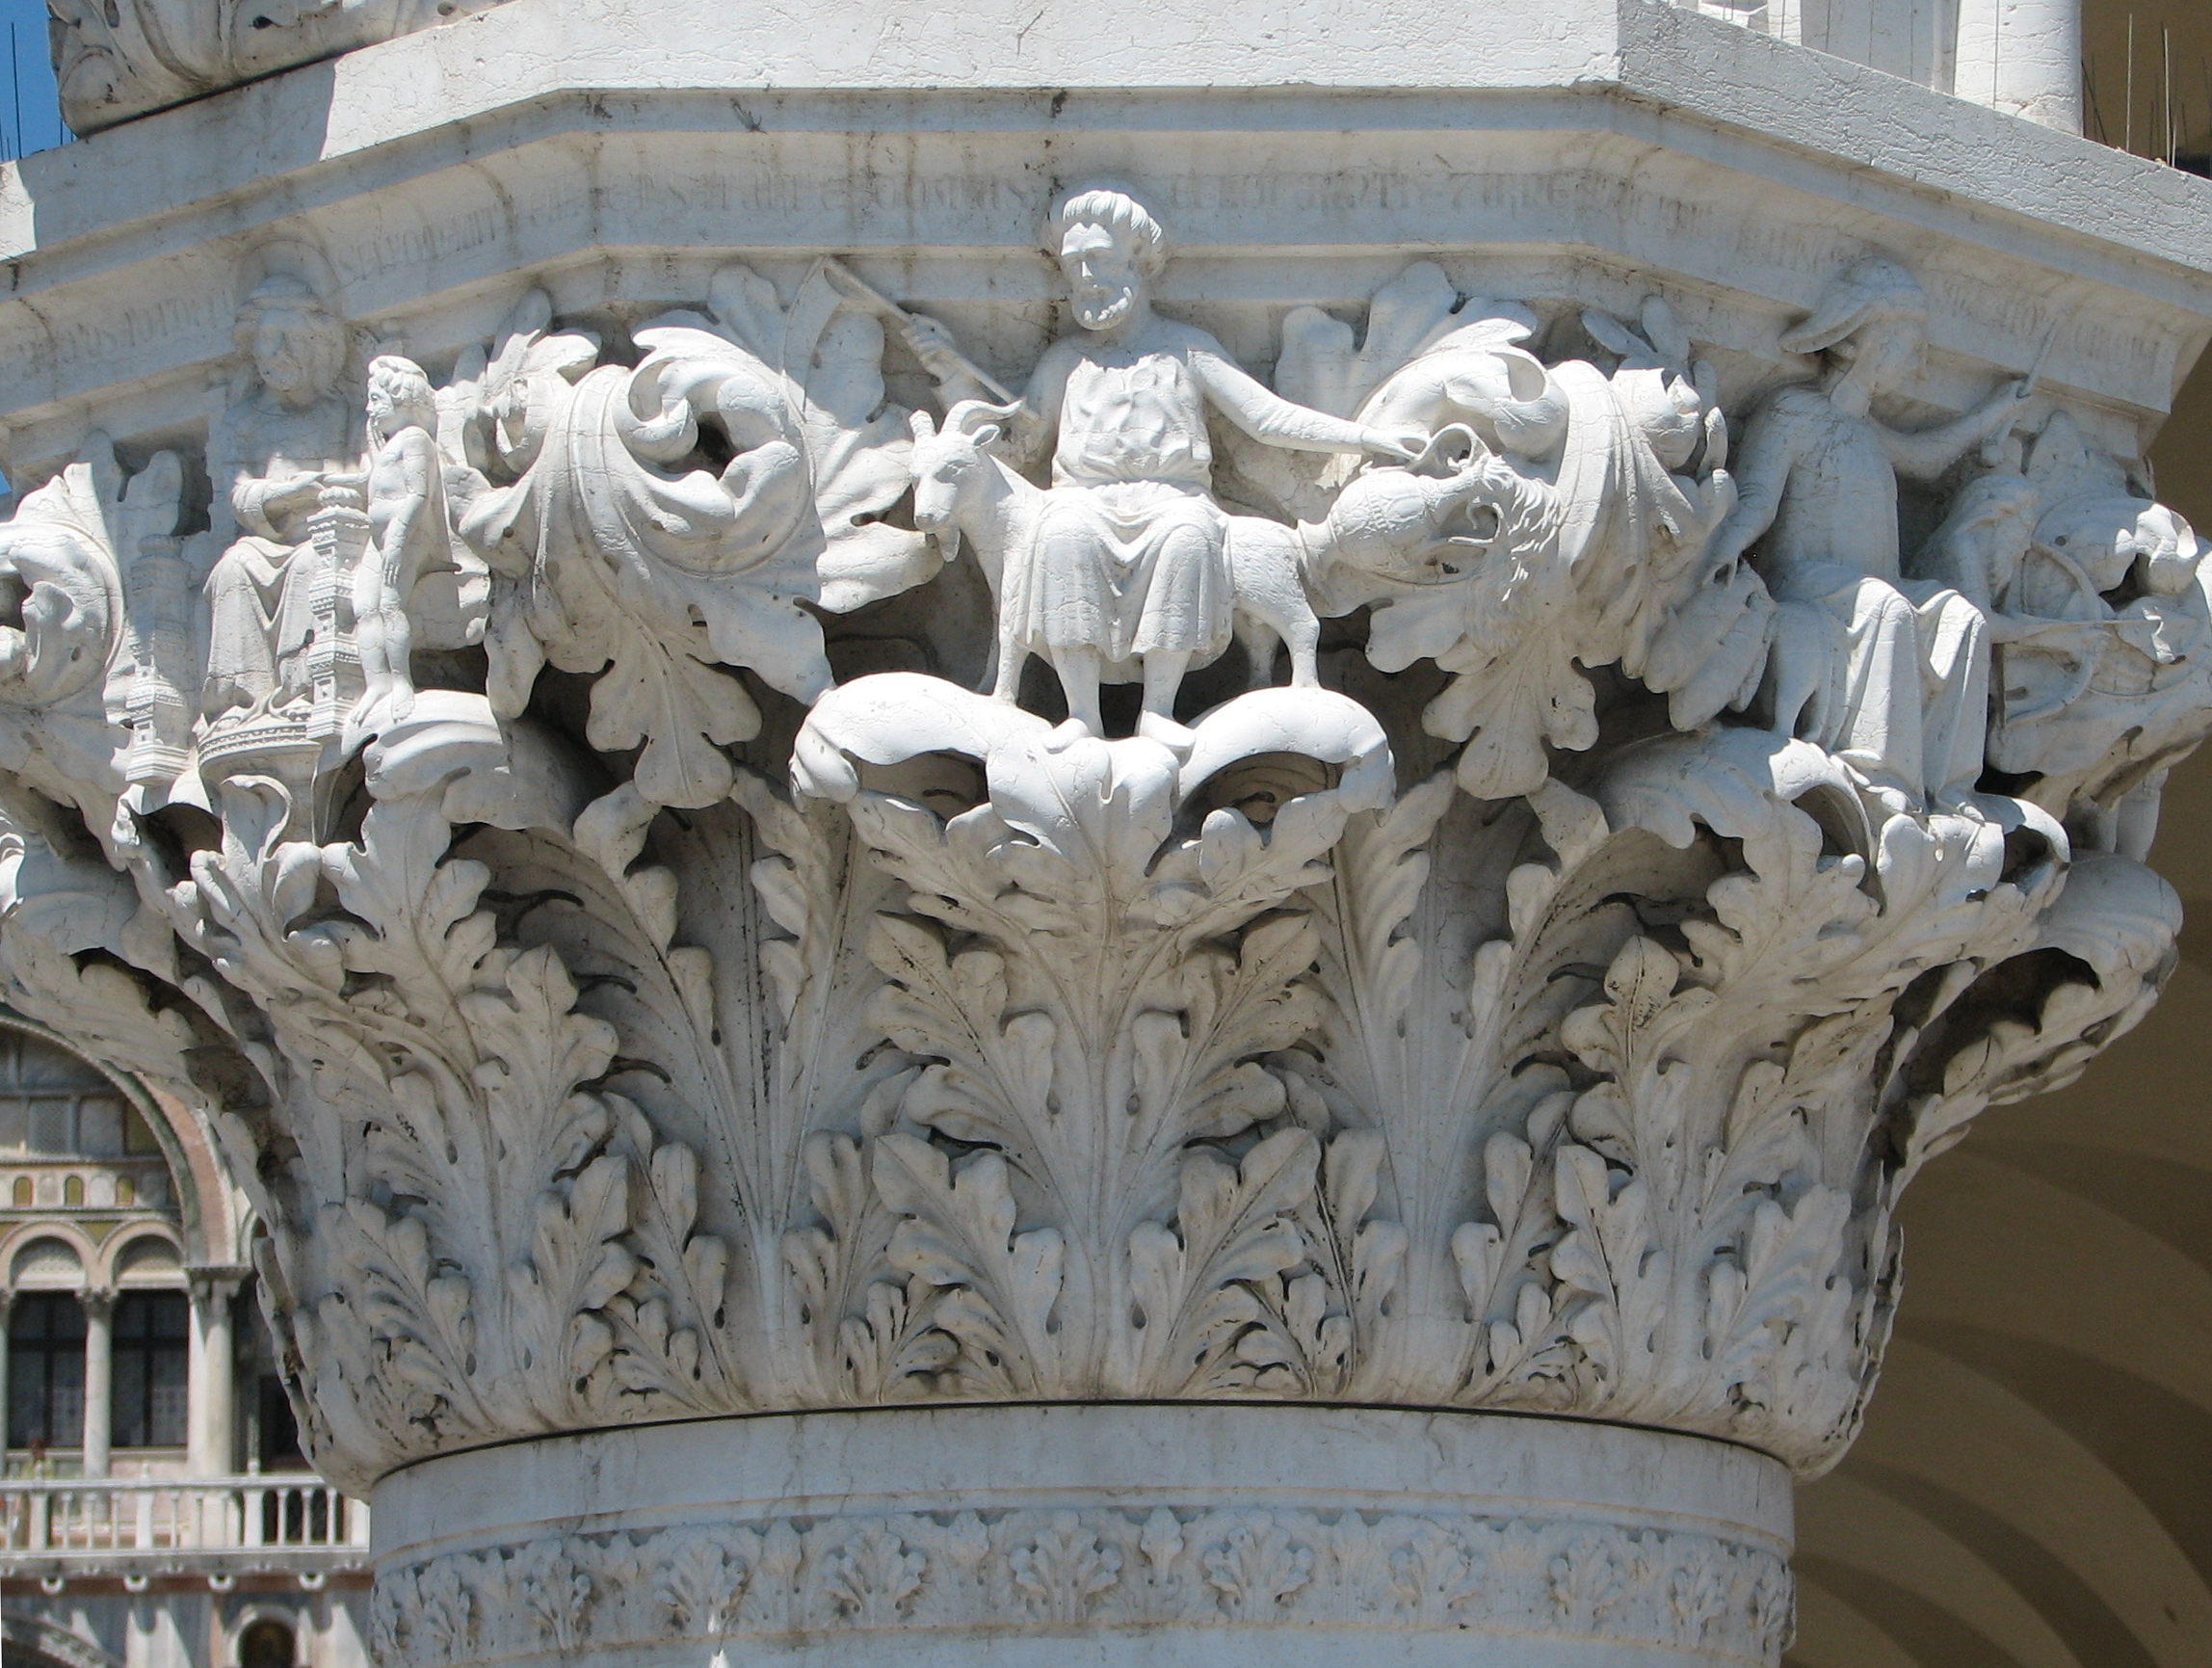 Detail of 1870s/1880s copy of the 18th capital in its current state Creation of Adam, left, side 8; Aquarius / Capricorn, side 1, centre; Jupiter, side 2, right